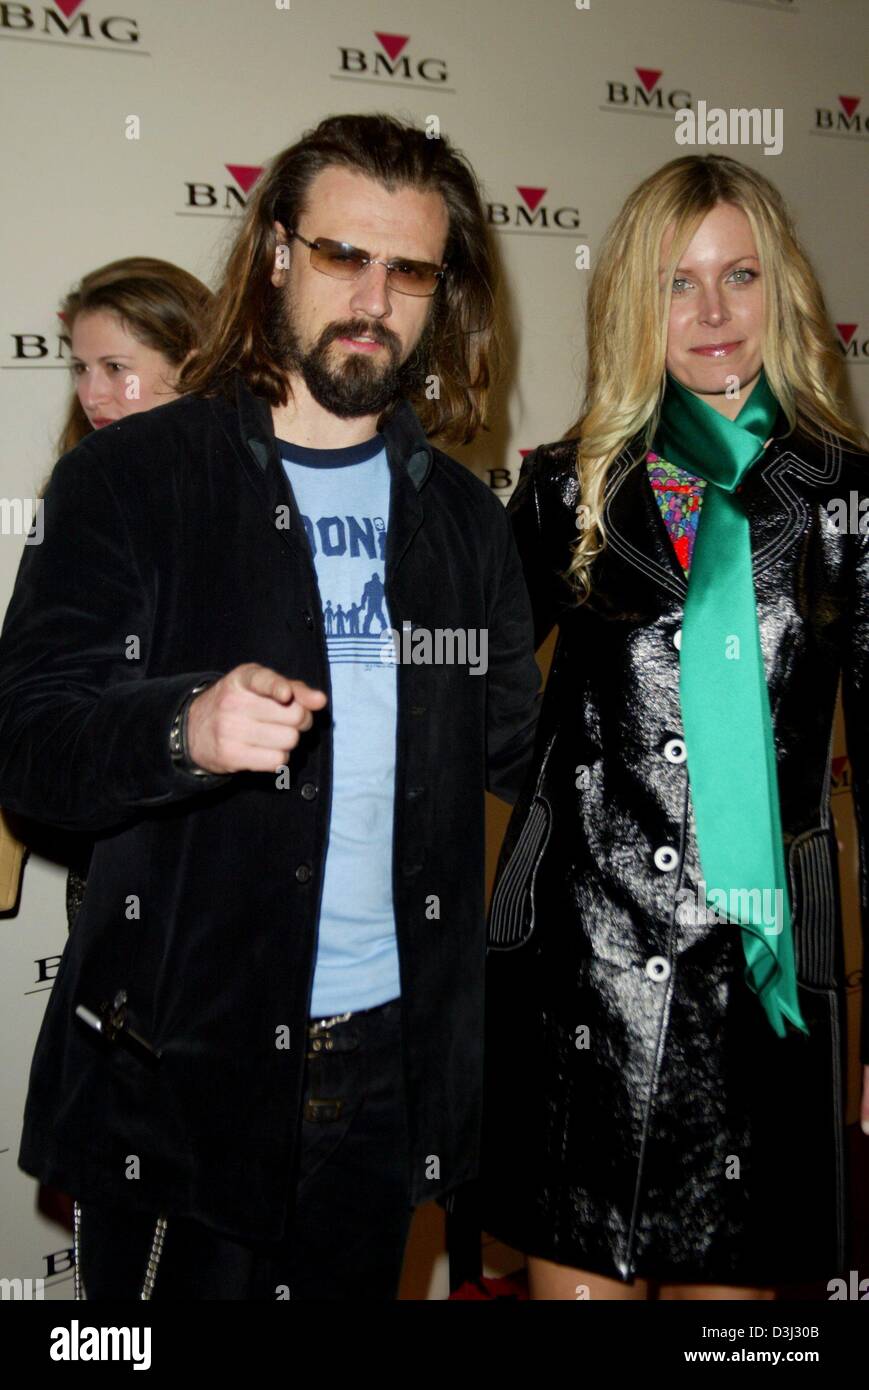 dpa) - Rob Zombie (L), a.k.a. Robert Cummings, of the US rock band 'White  Zombie' gestures as